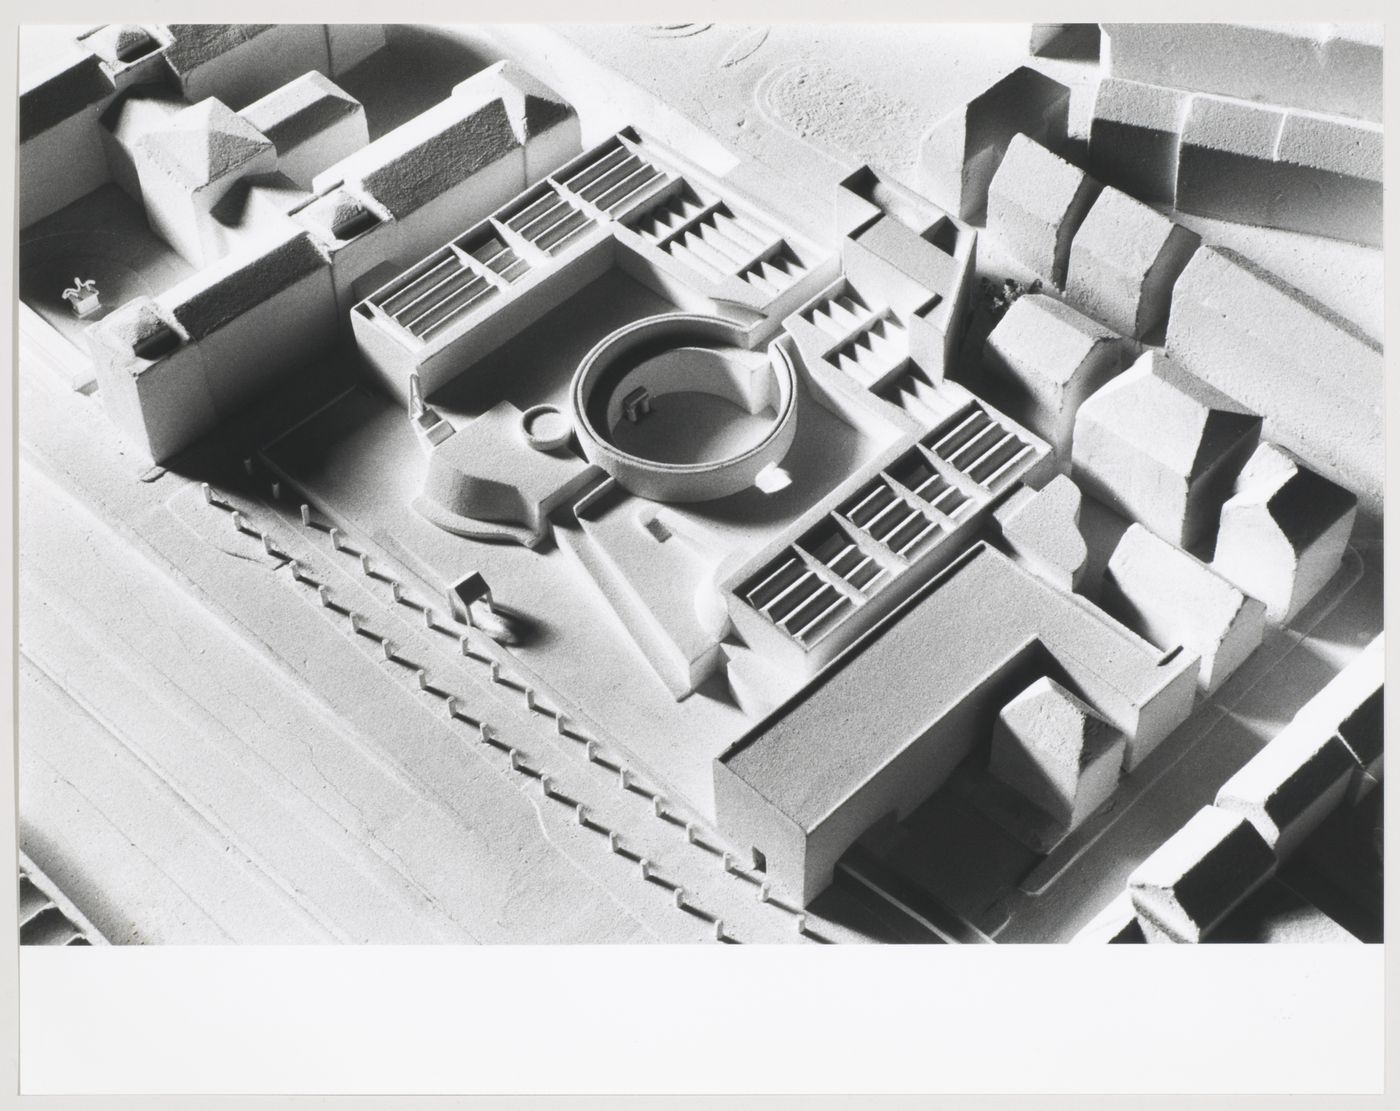 Staatsgalerie, Stuttgart, Germany: view of competition model